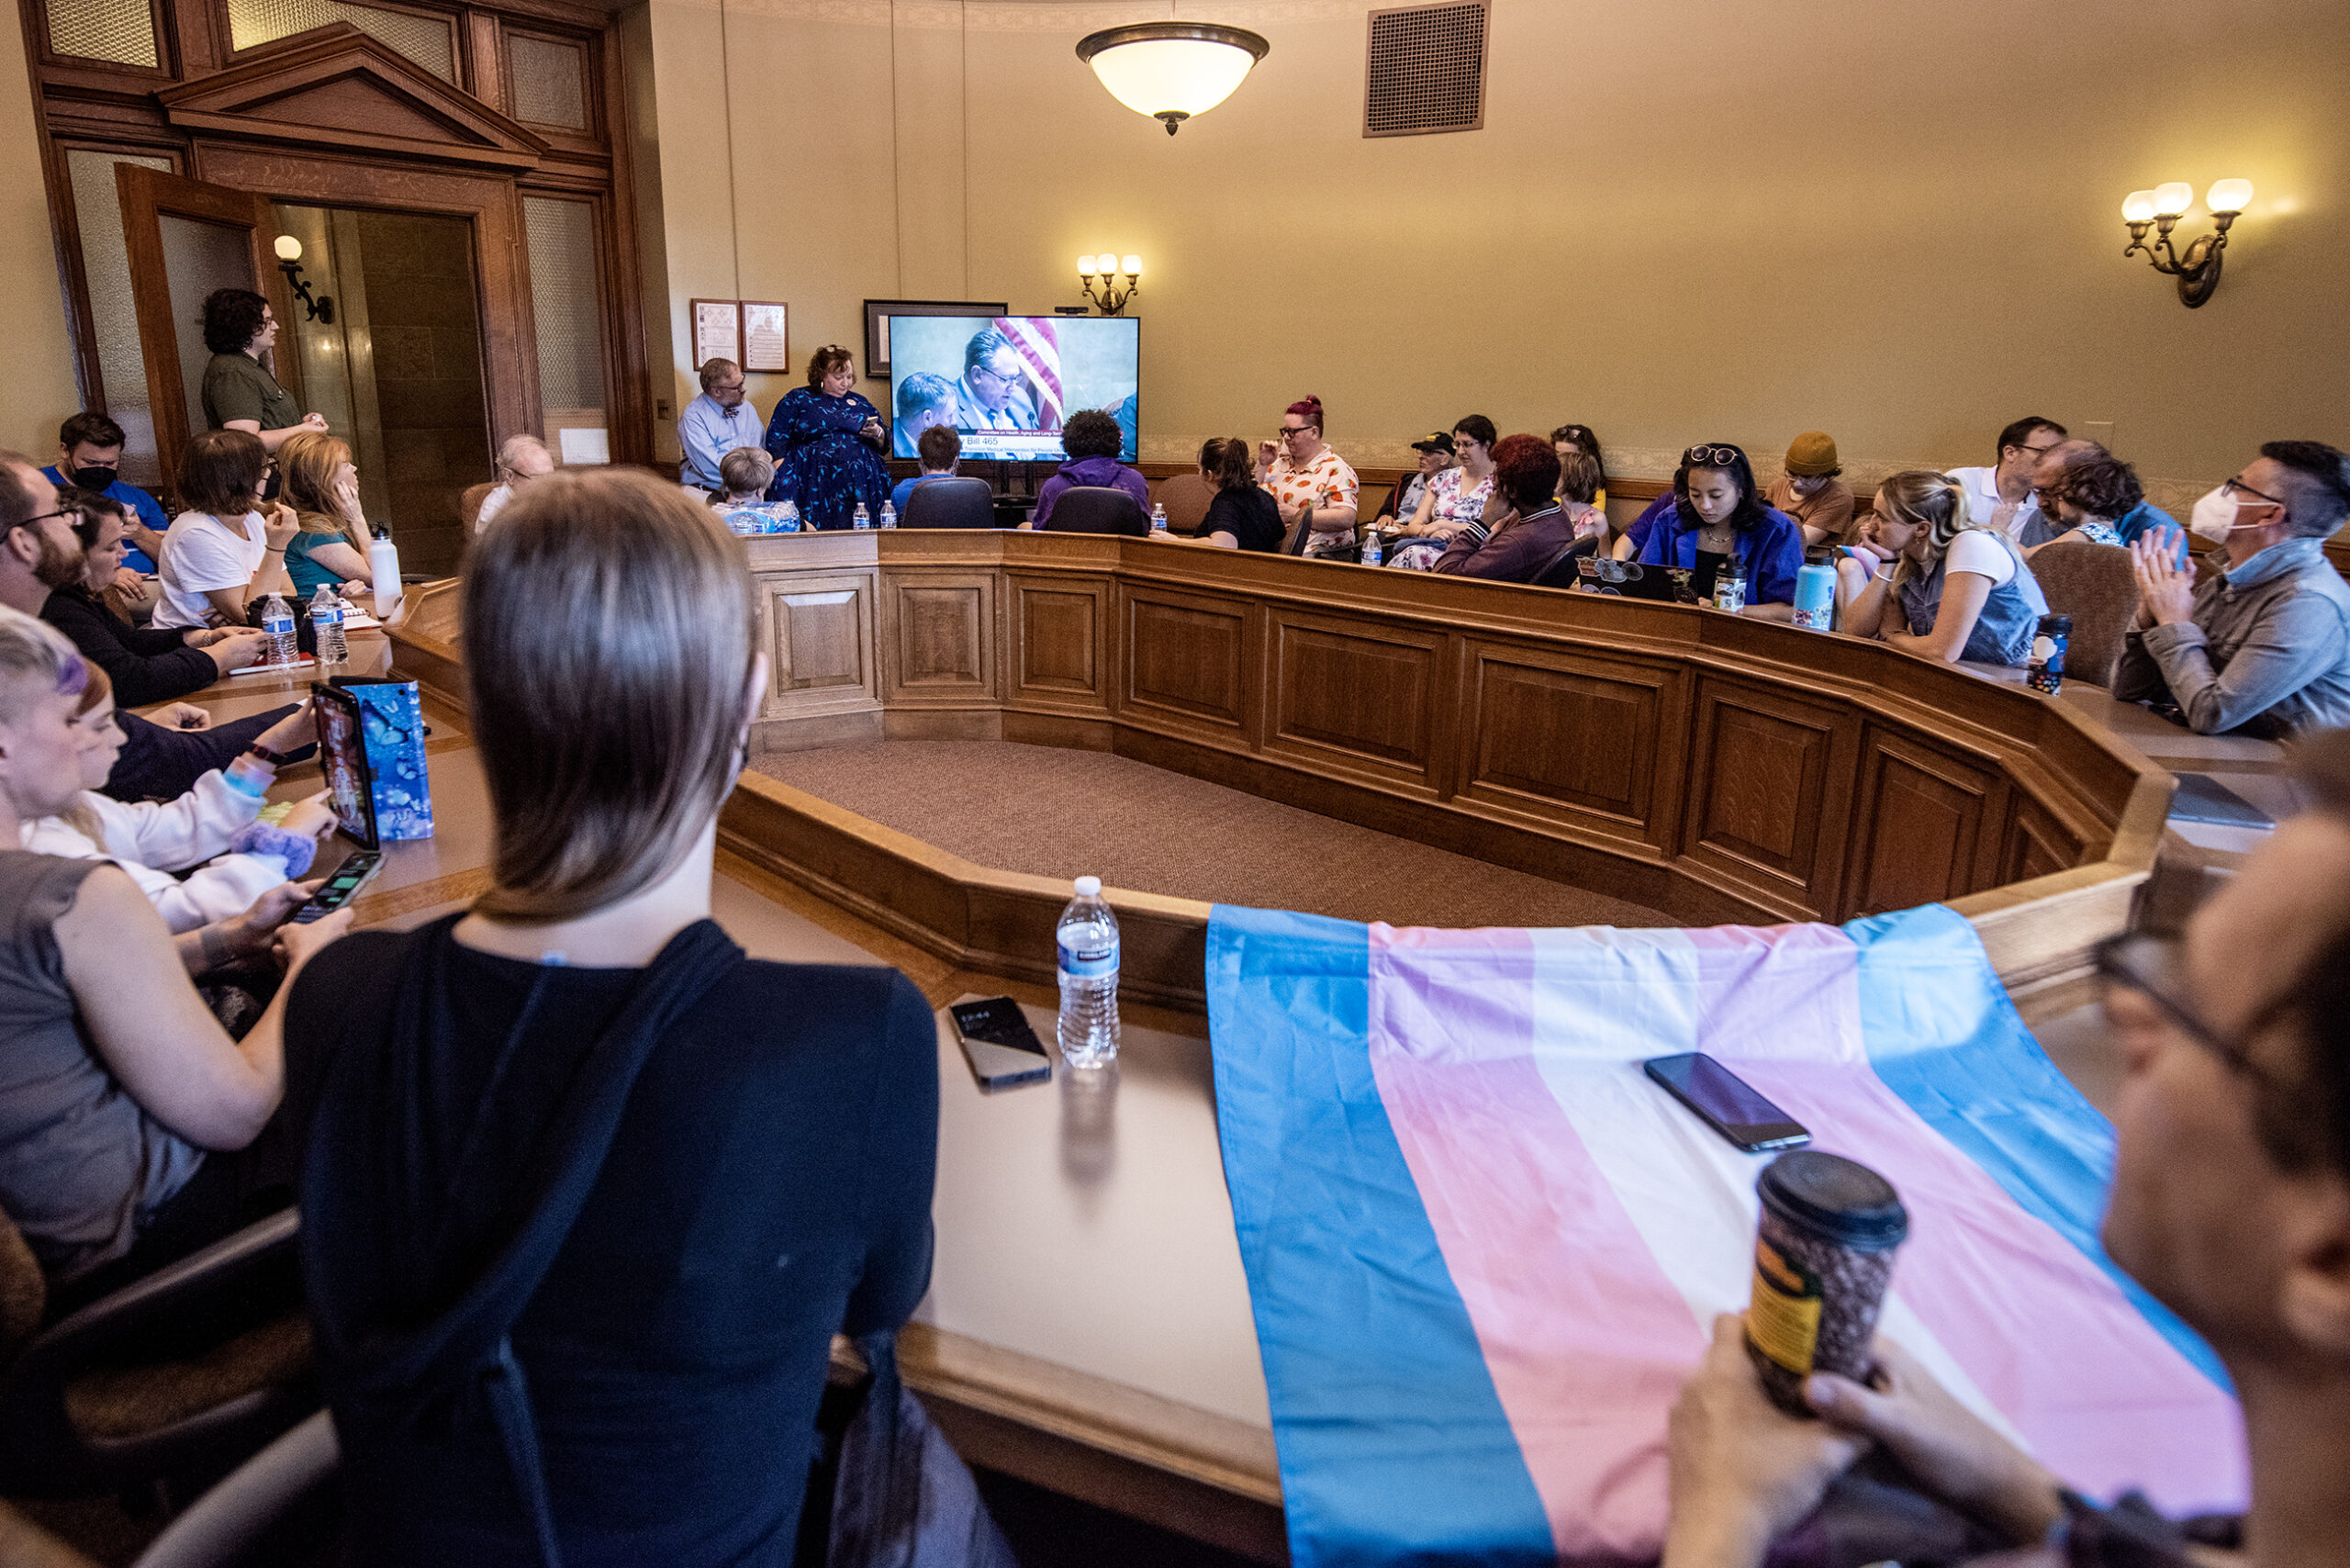 A trans flag is draped over a table as people watch the hearing on tv.